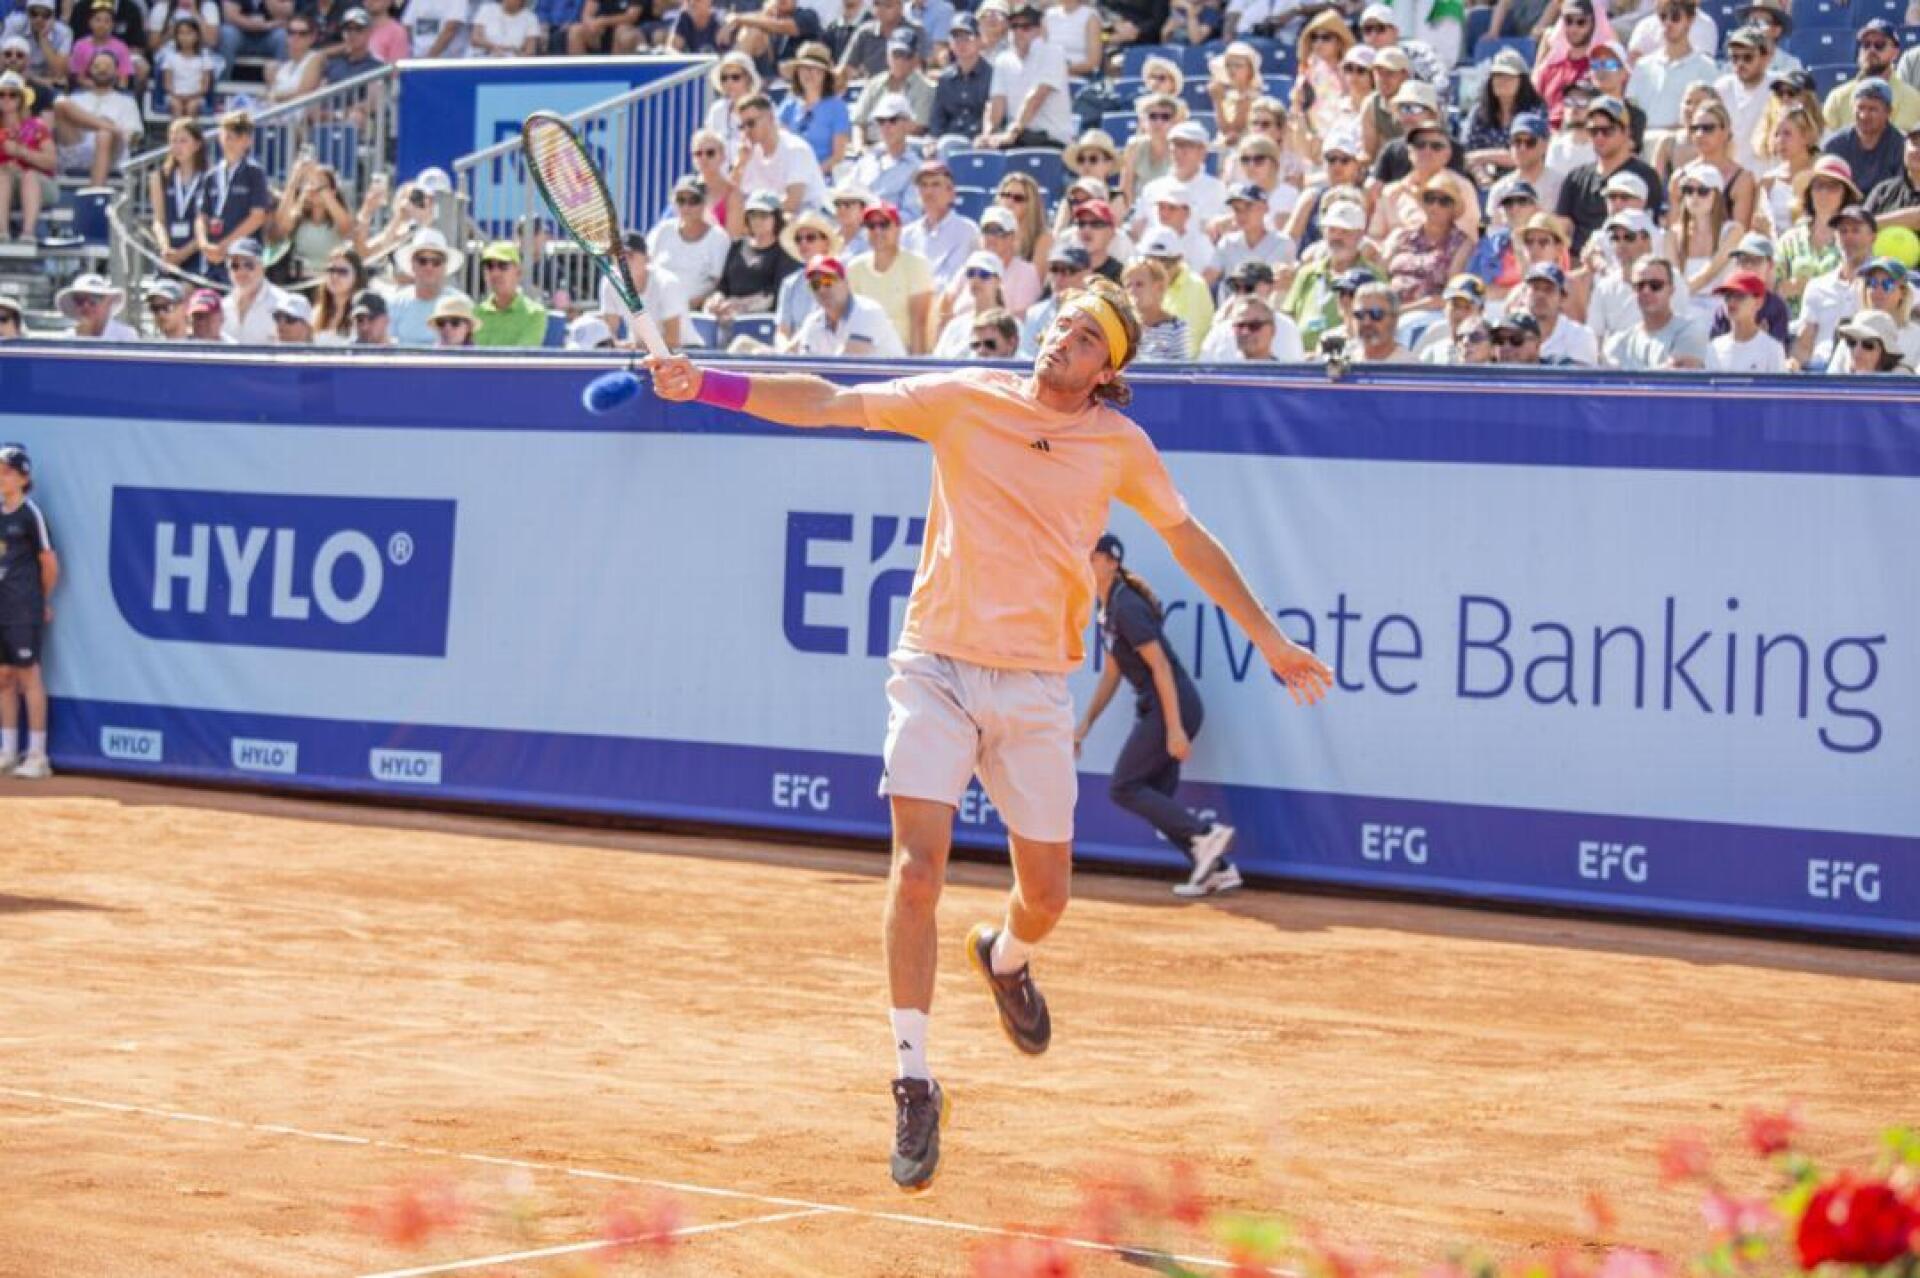  Stefanos Tsitsipas was in a good mood after his victory. In the winner